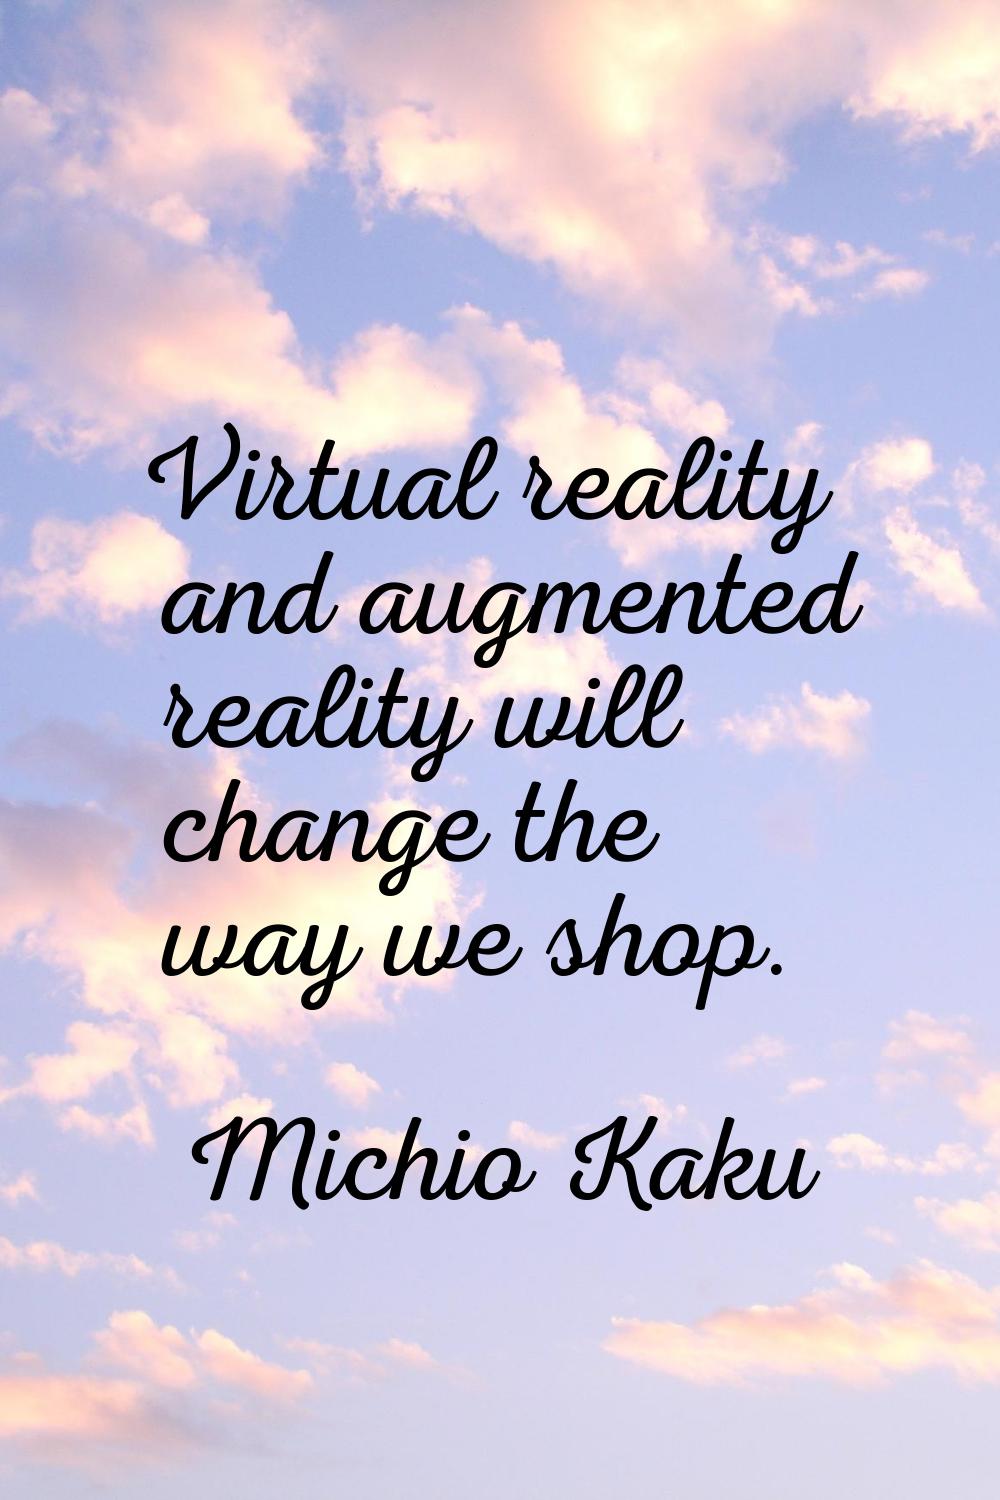 Virtual reality and augmented reality will change the way we shop.